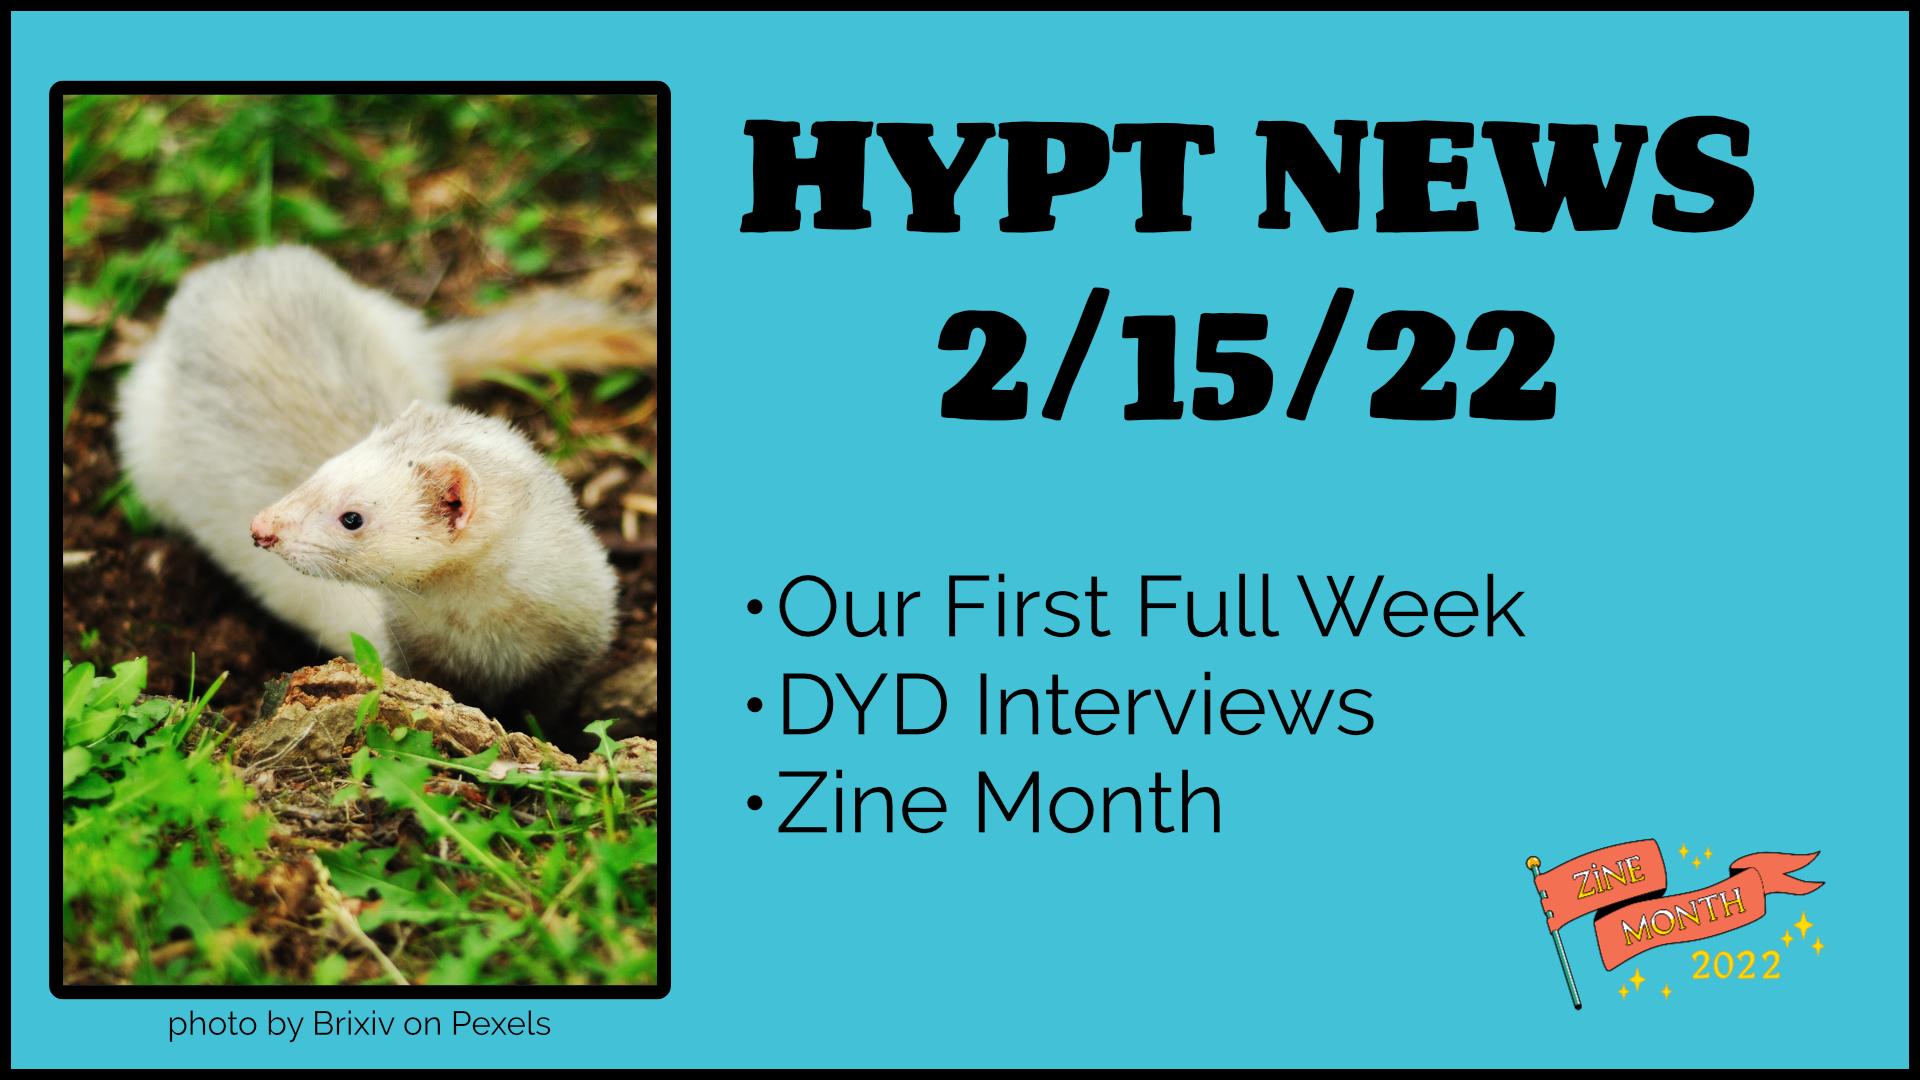 Cover Image for The HYPT Weekly News 2/15/22